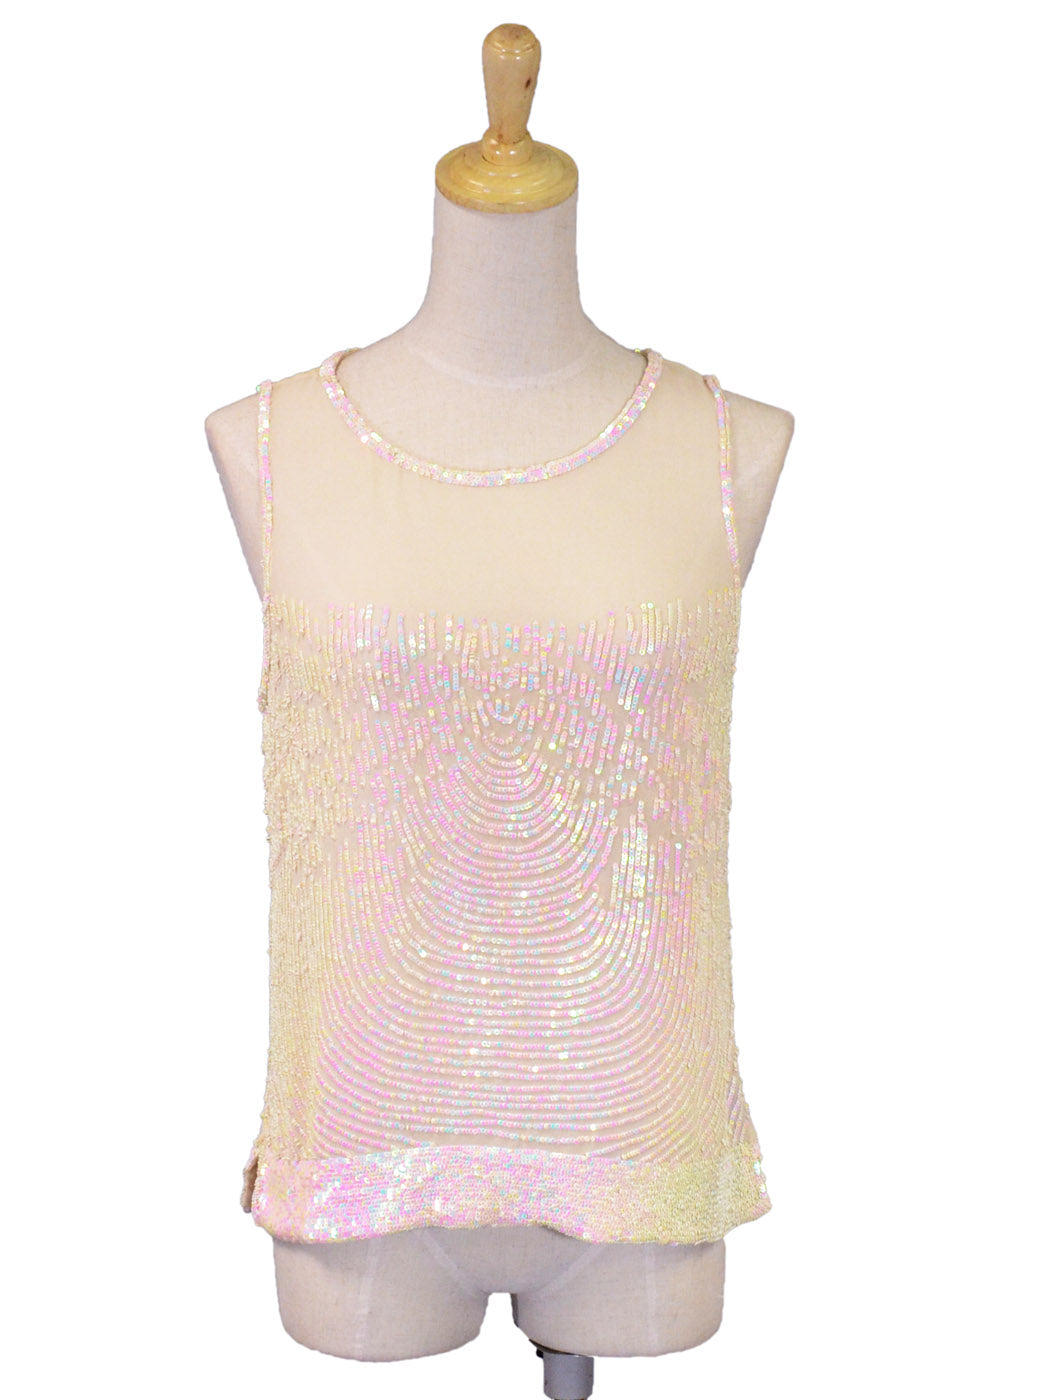 Ligali Dressy Sleeveless Loose Fitted Top With Mesh Neckline And Sequin Design - ALILANG.COM